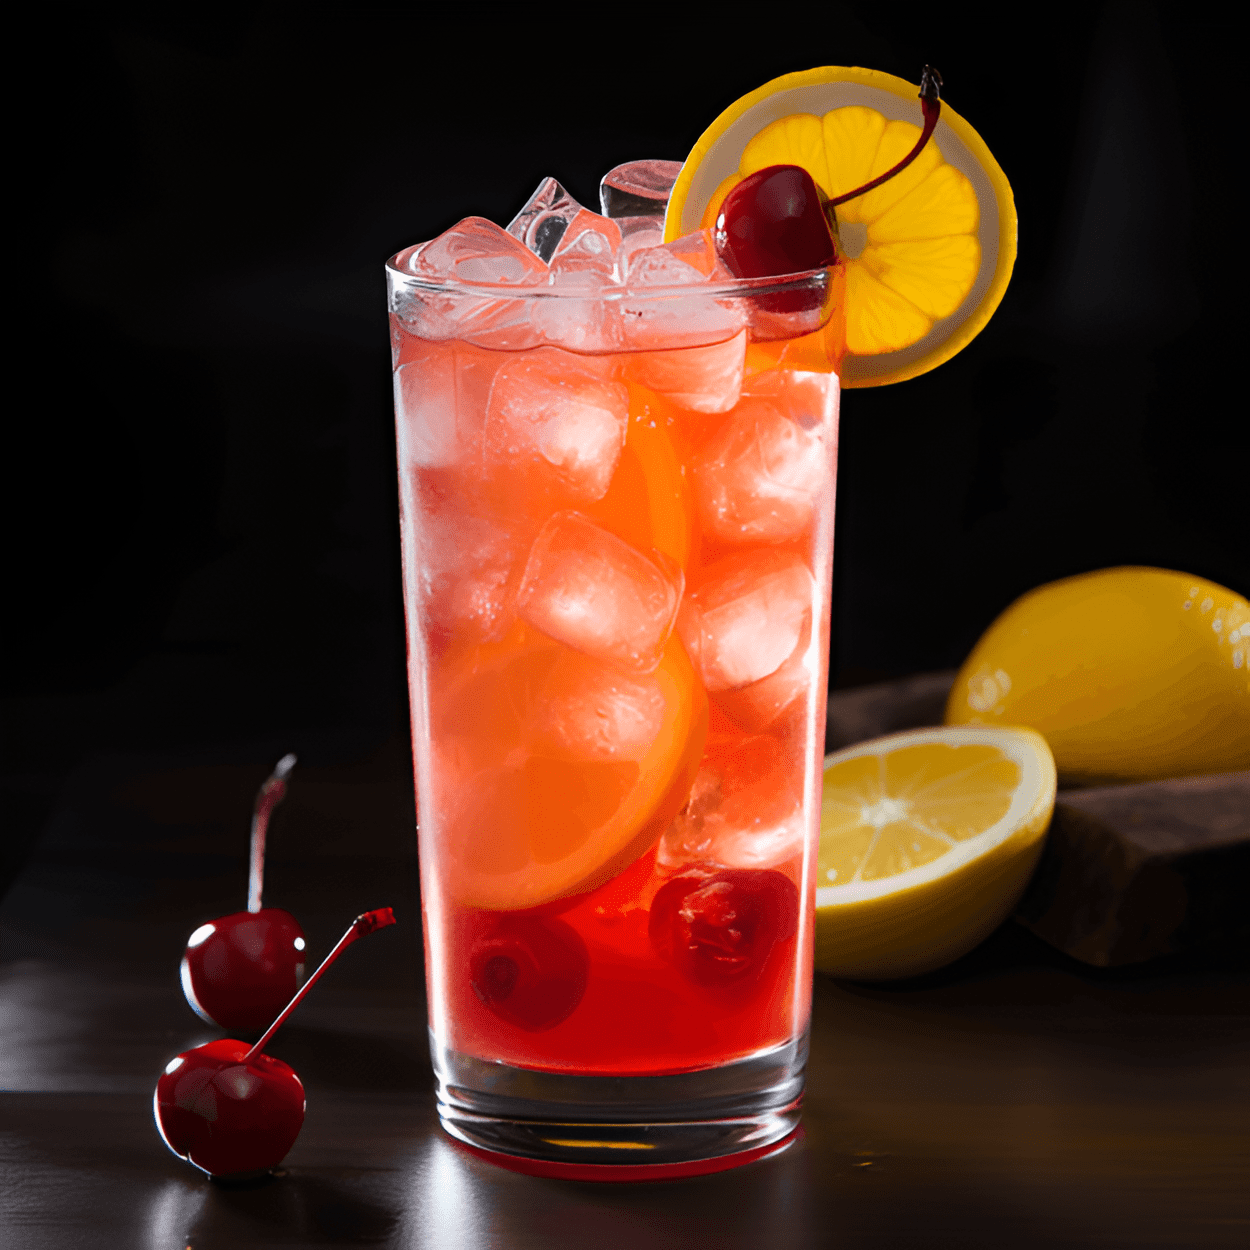 Sloe Gin Fizz Cocktail Recipe - The Sloe Gin Fizz has a sweet, fruity, and slightly tart taste. The sloe gin provides a rich berry flavor, while the lemon juice adds a refreshing citrus note. The addition of simple syrup balances the tartness, and the club soda gives the drink a light, effervescent texture.